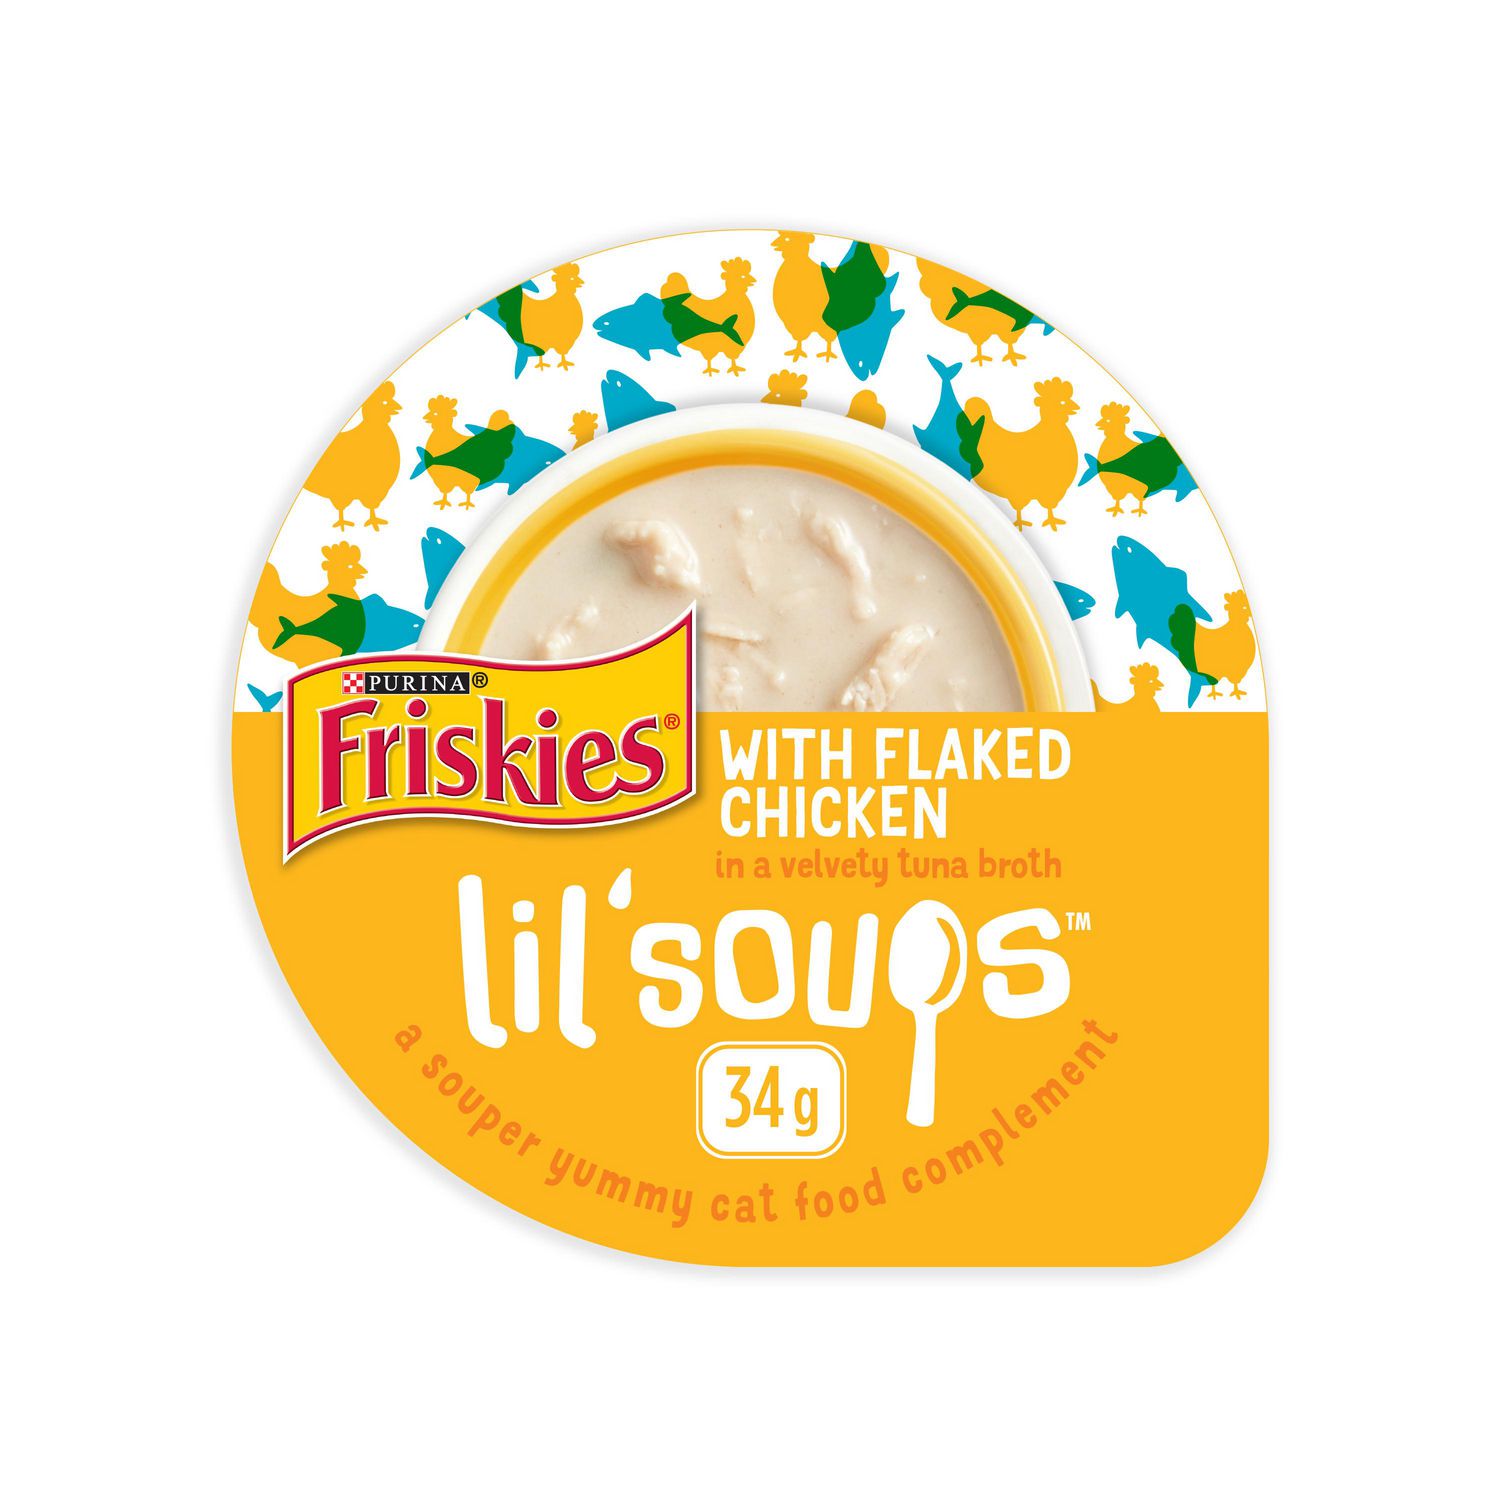 Friskies Lil’ Soups Flaked Chicken, Cat Food Complement 34g Walmart